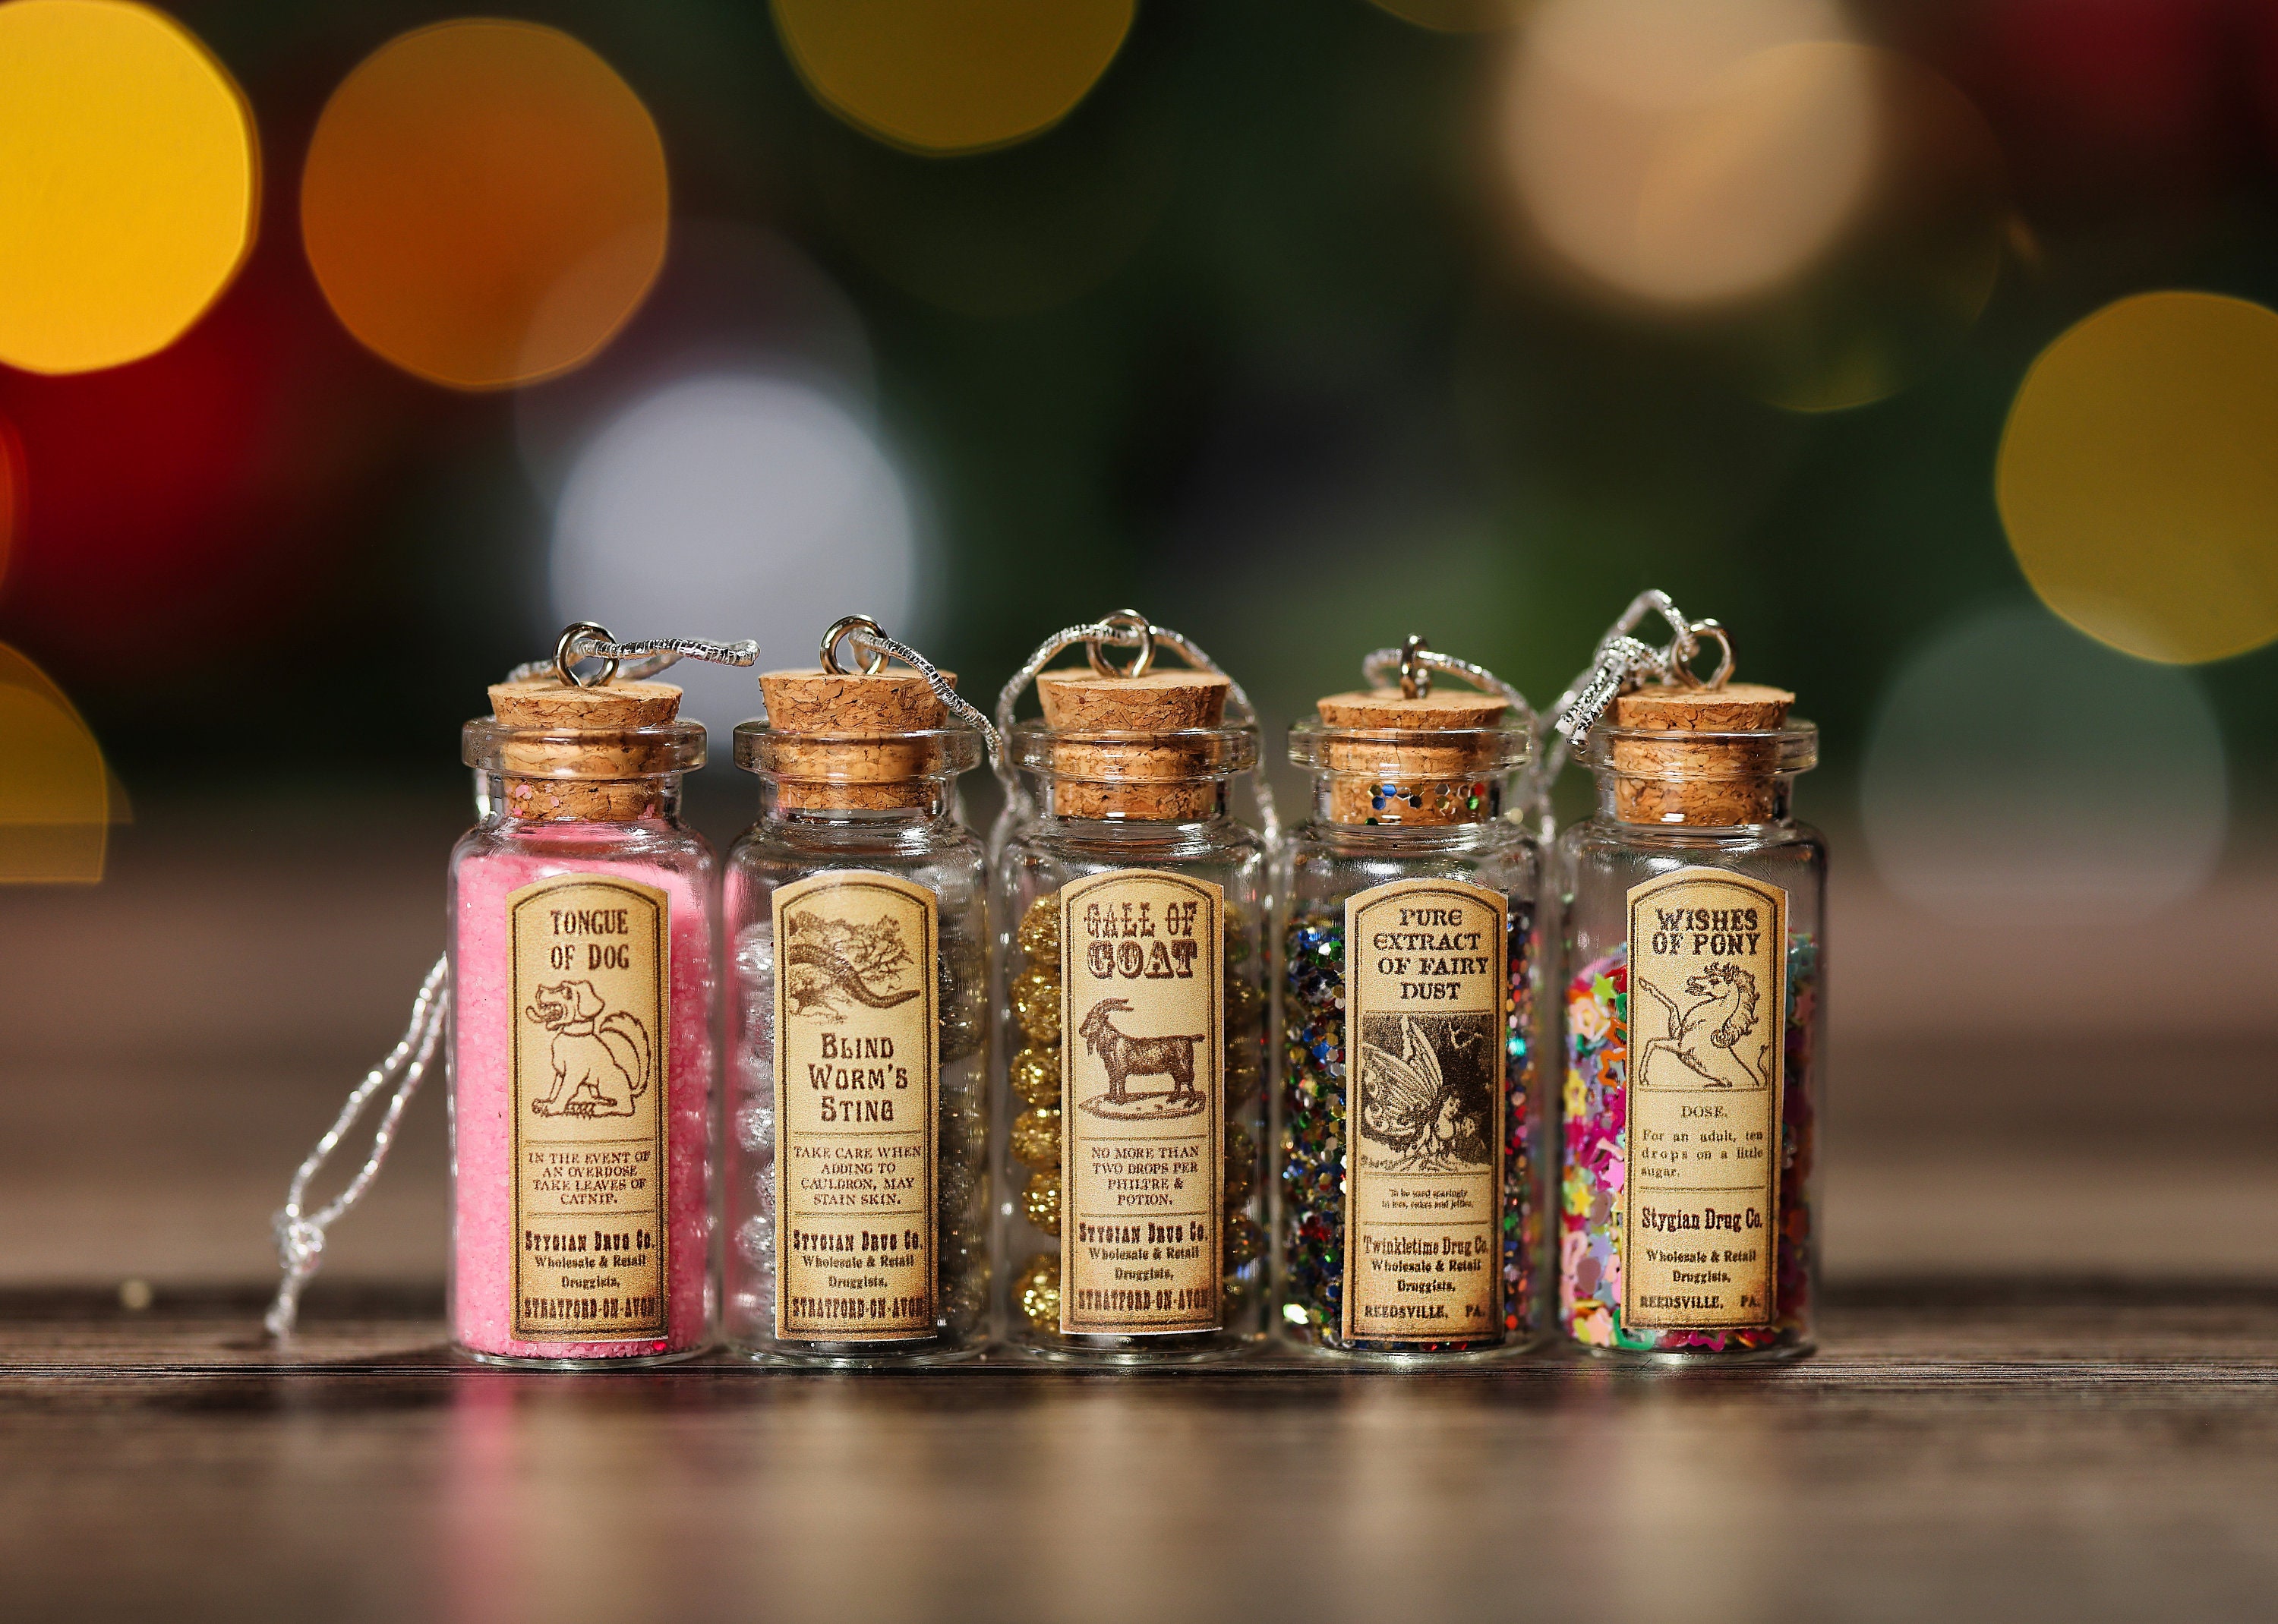 Willow & Riley Glass Potions Bottles with Cork Toppers - Set of 4 - Multi -  On Sale - Bed Bath & Beyond - 38426237